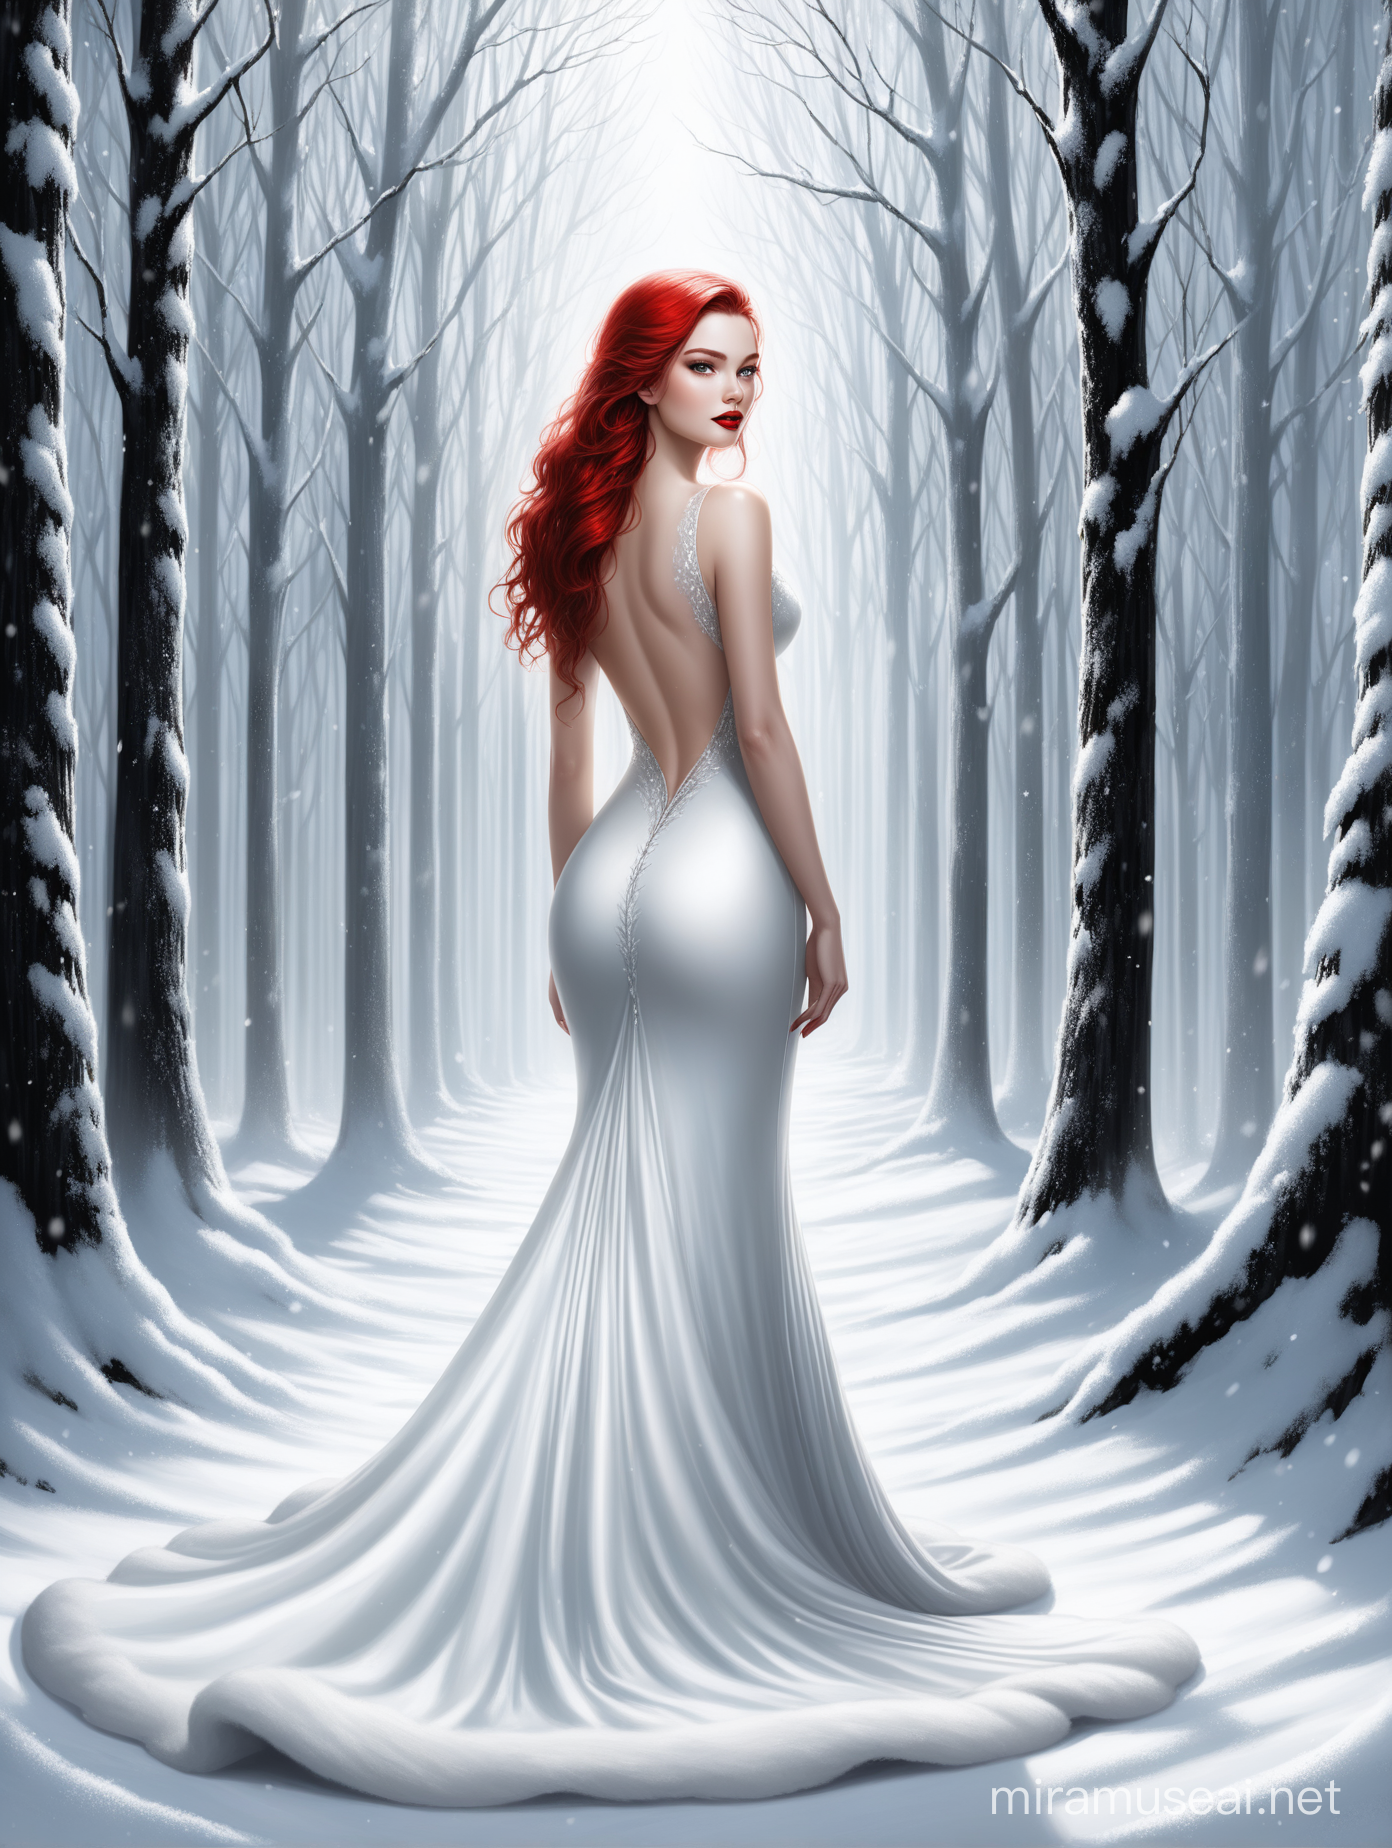 Aivision, full body of beautiful young women , full red lips. In shining snow - white , fur  long dress Exposed back  , shining forest around . fairy tale , realistic facial features . Realistic hair texture,elegant , crispy quality Federico Bebber's expressive, black and withe colors